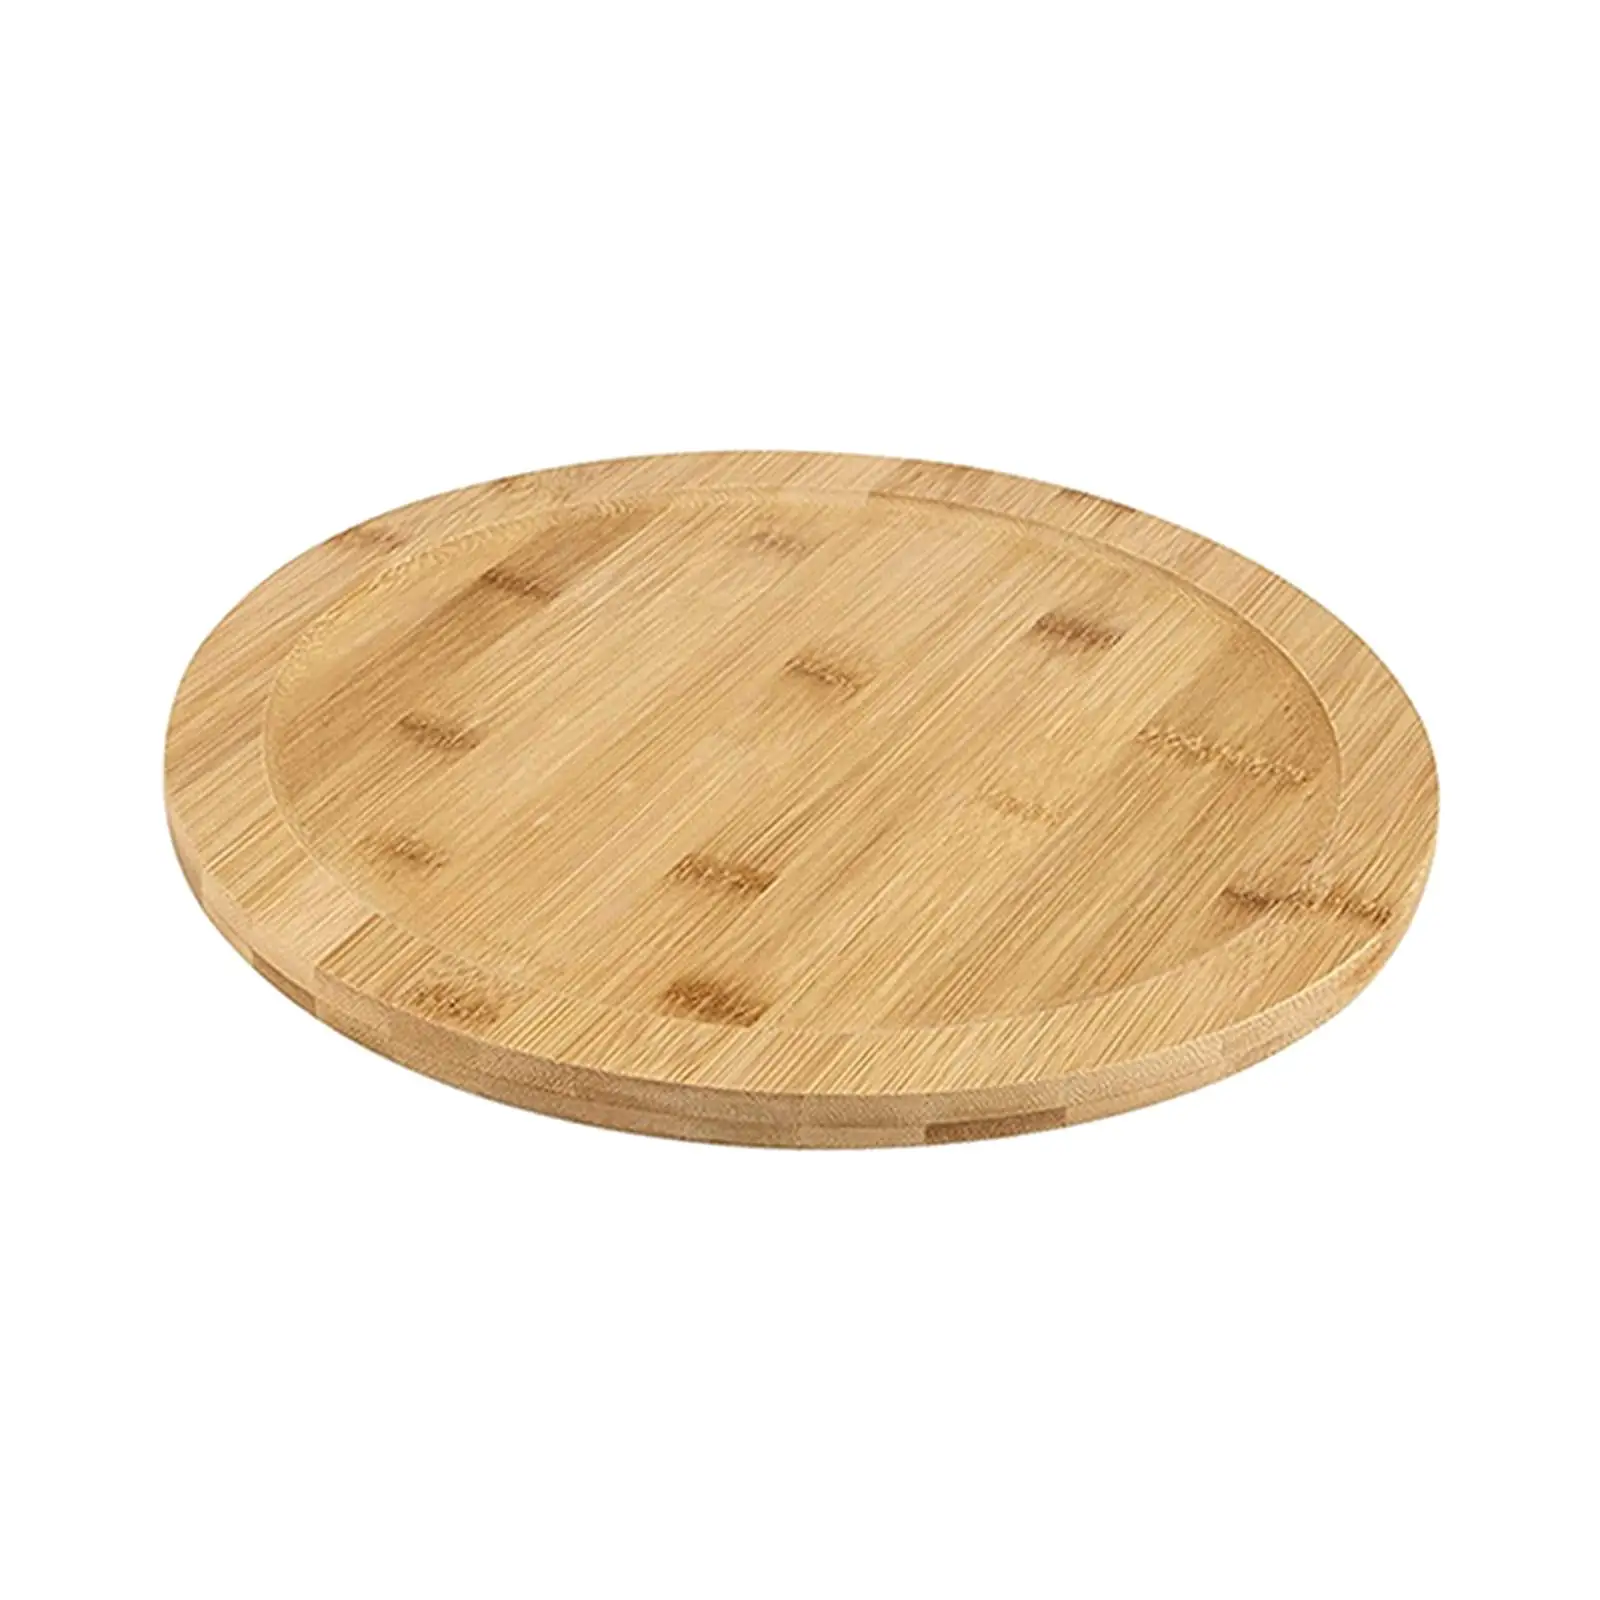 Serving Plate Pizza Serving Board Rotating Board Wooden Turntable Rotating Base for Home Dining Table Pantry Cabinet Kitchen